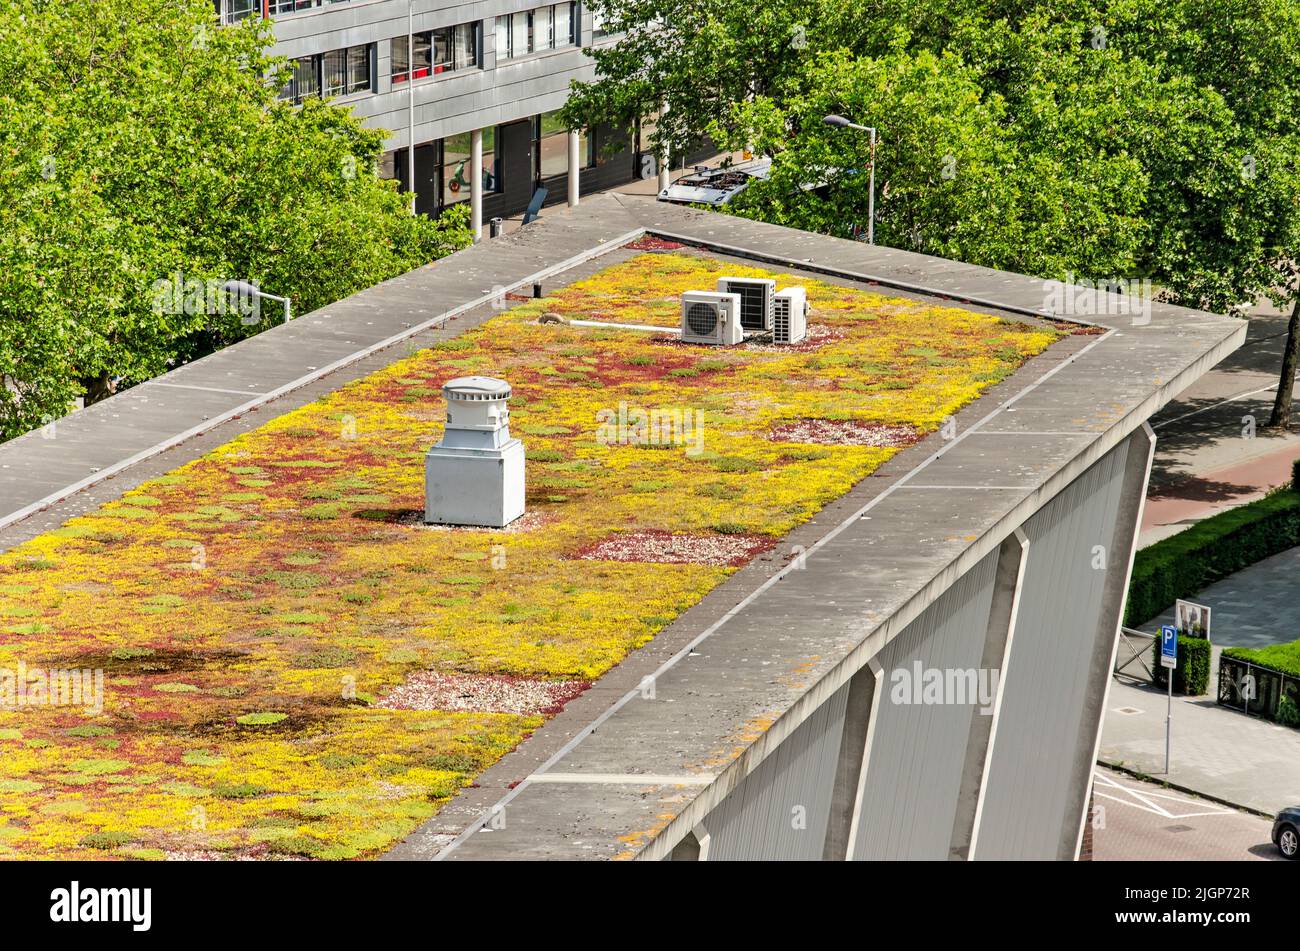 Rotterdam, The Netherlands, June 2, 2022: colorful sedum growing on the roof of the New Institute Stock Photo